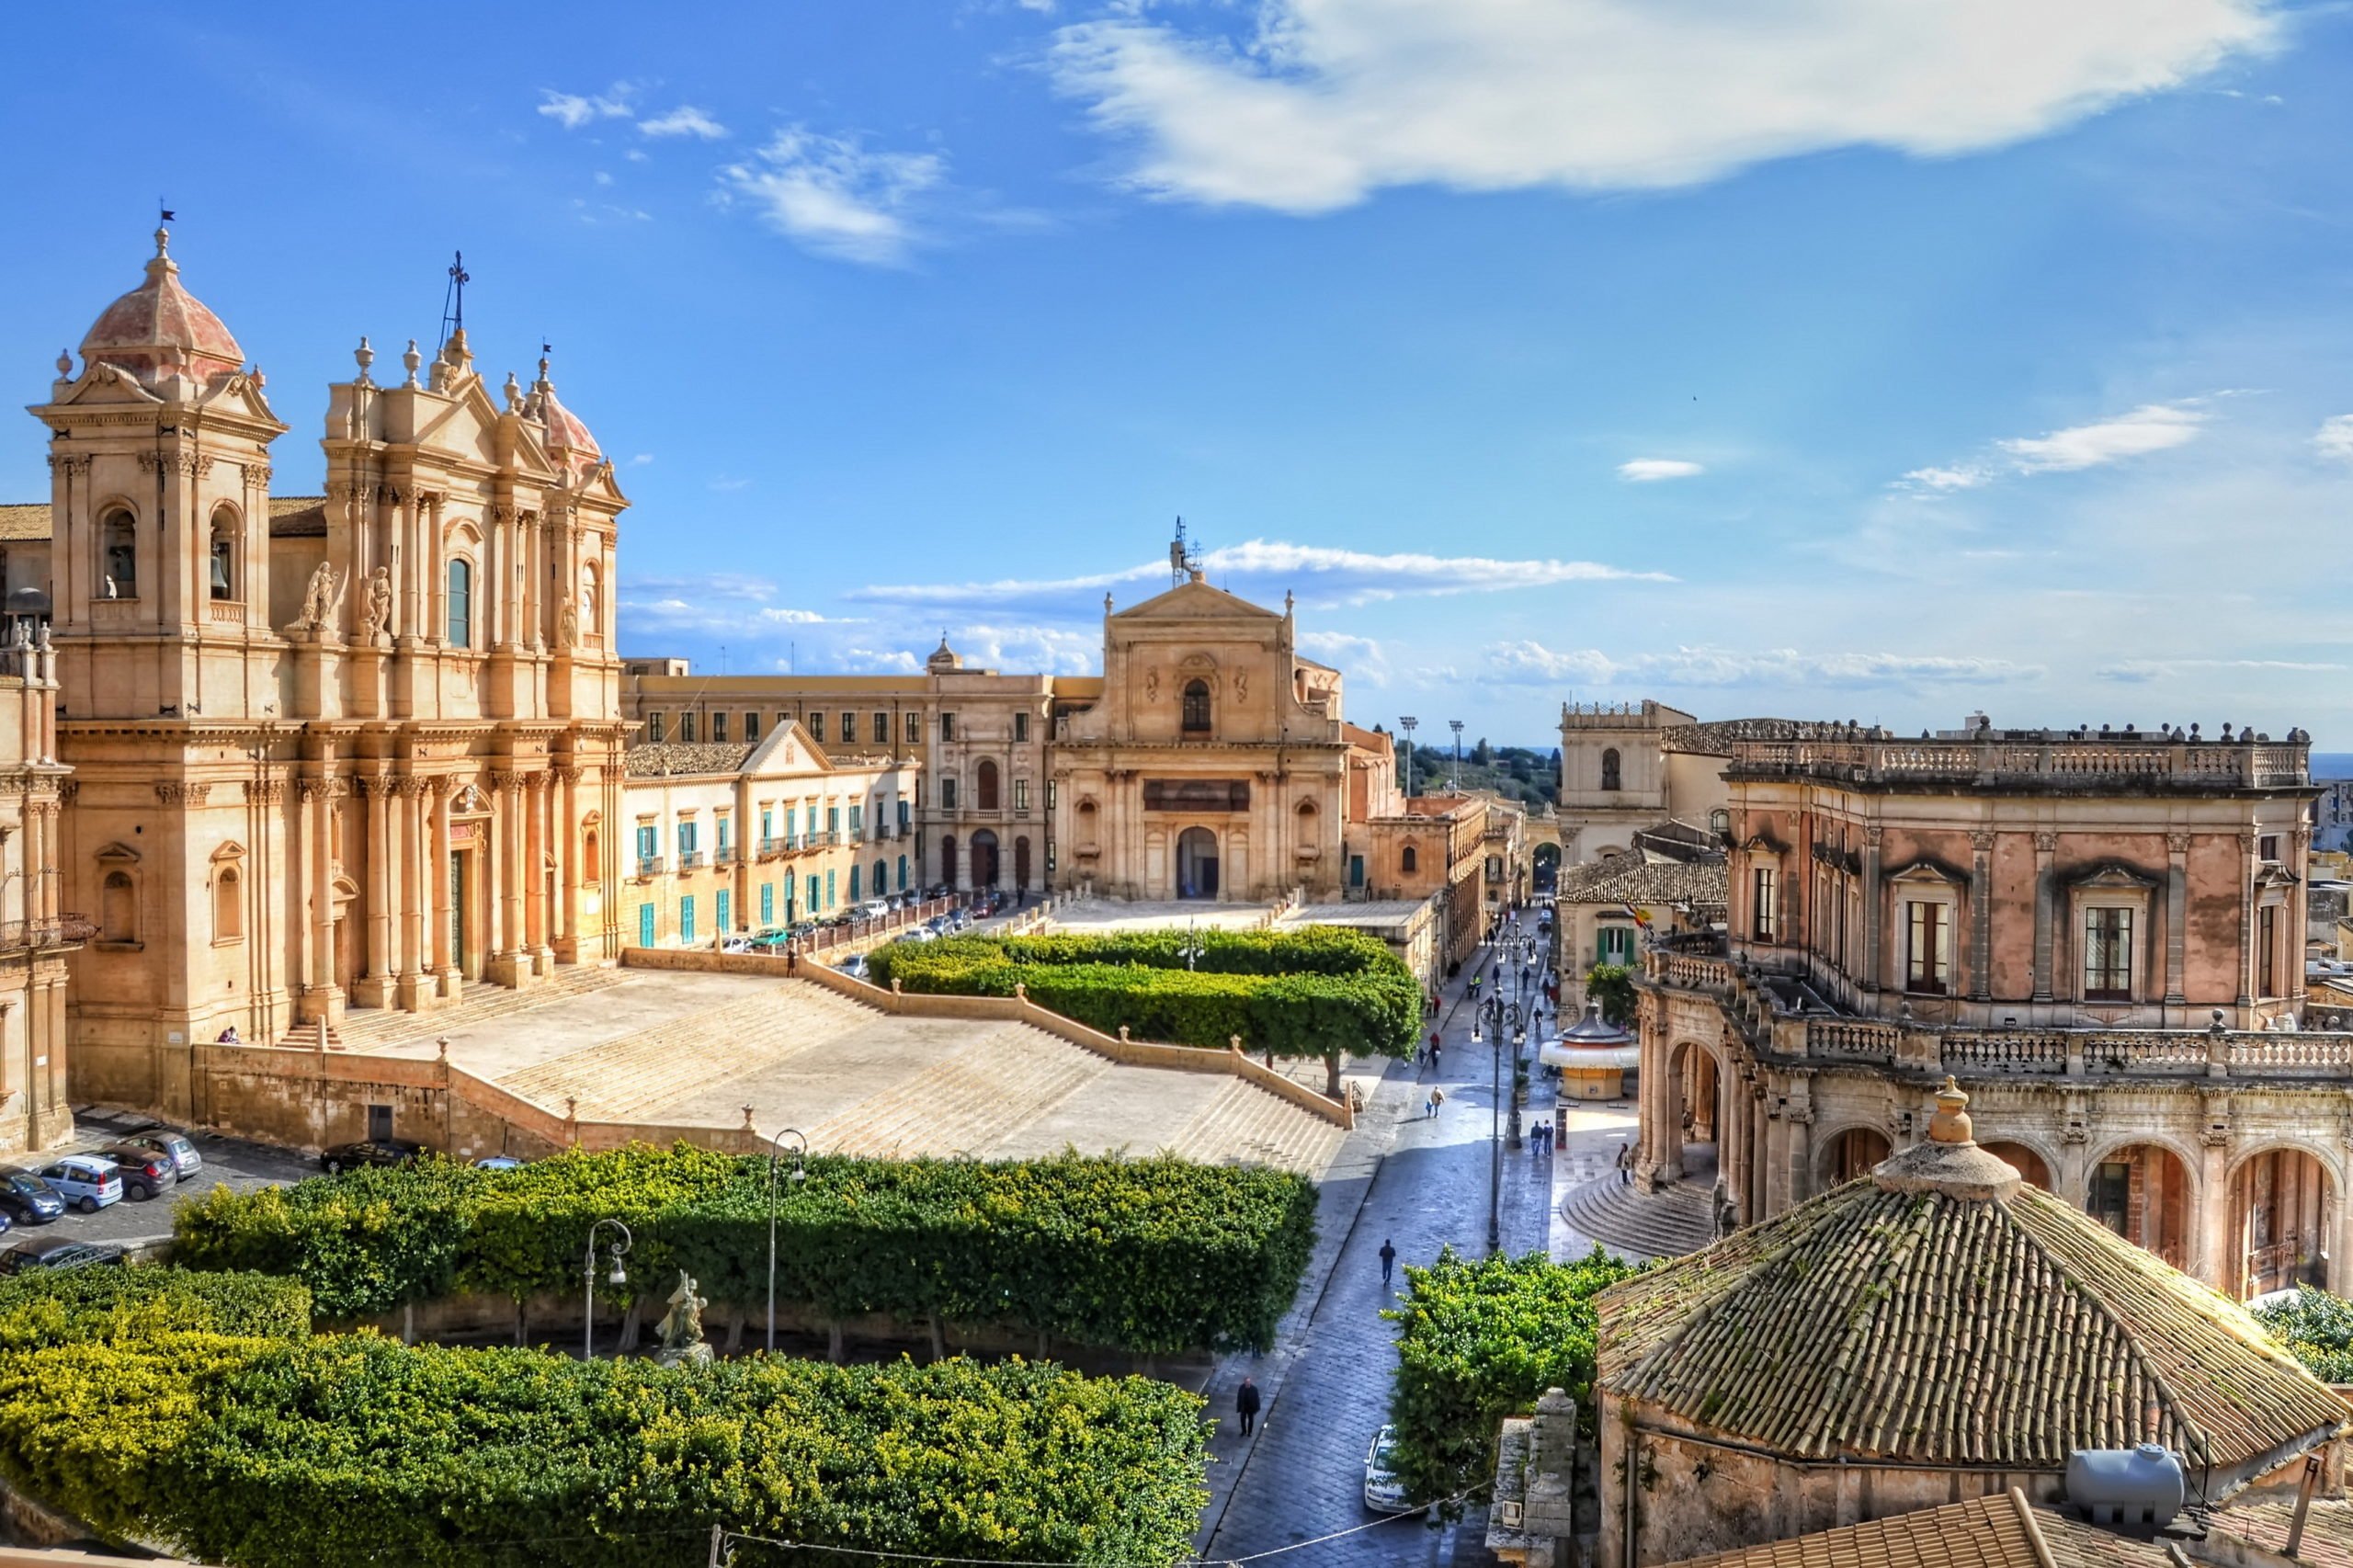 Enjoy A Walking Tour Through Noto On The 8 Days Highlights Of Sicily Tour Package